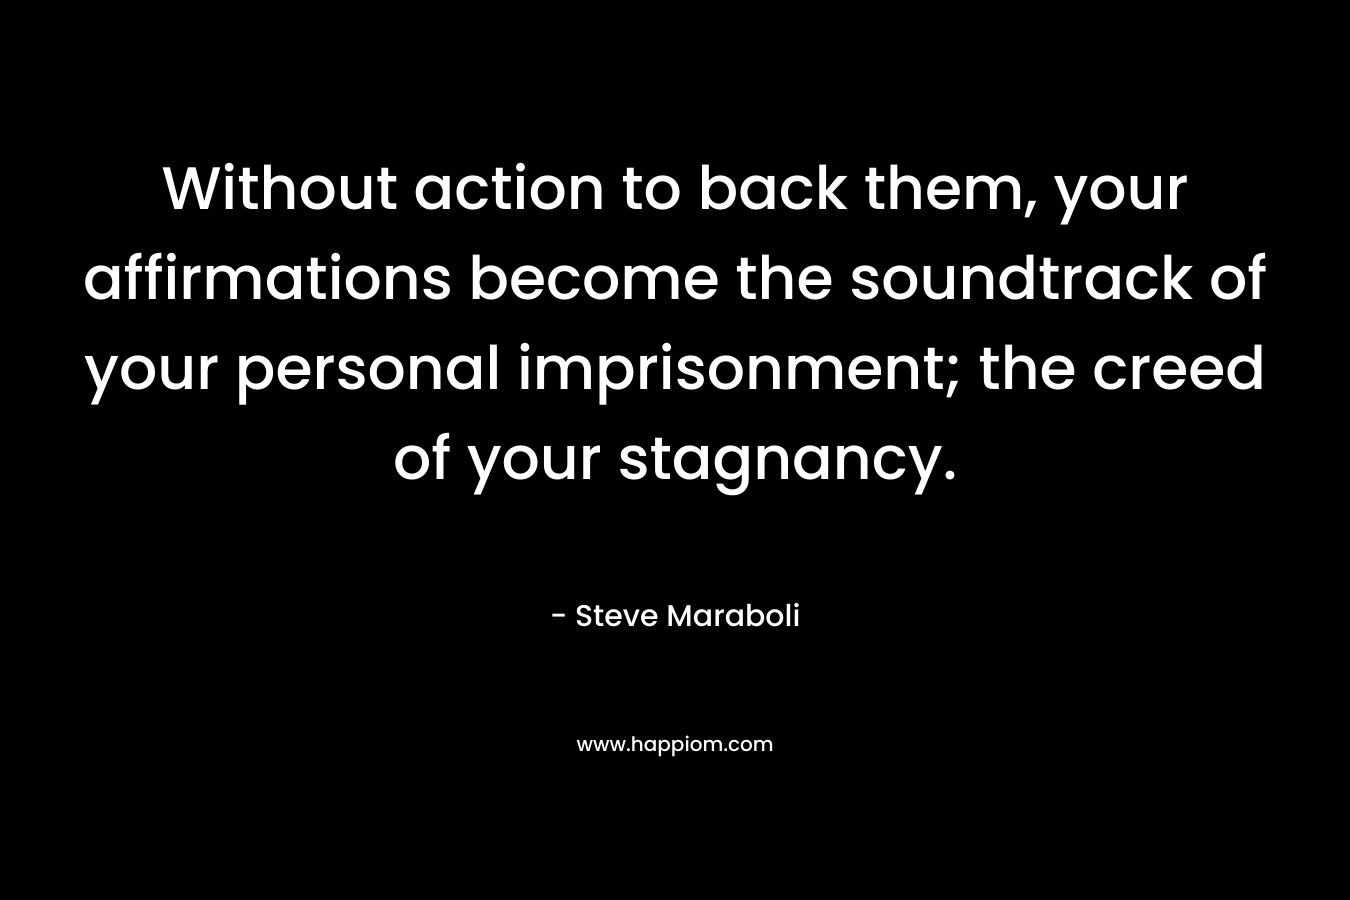 Without action to back them, your affirmations become the soundtrack of your personal imprisonment; the creed of your stagnancy. – Steve Maraboli